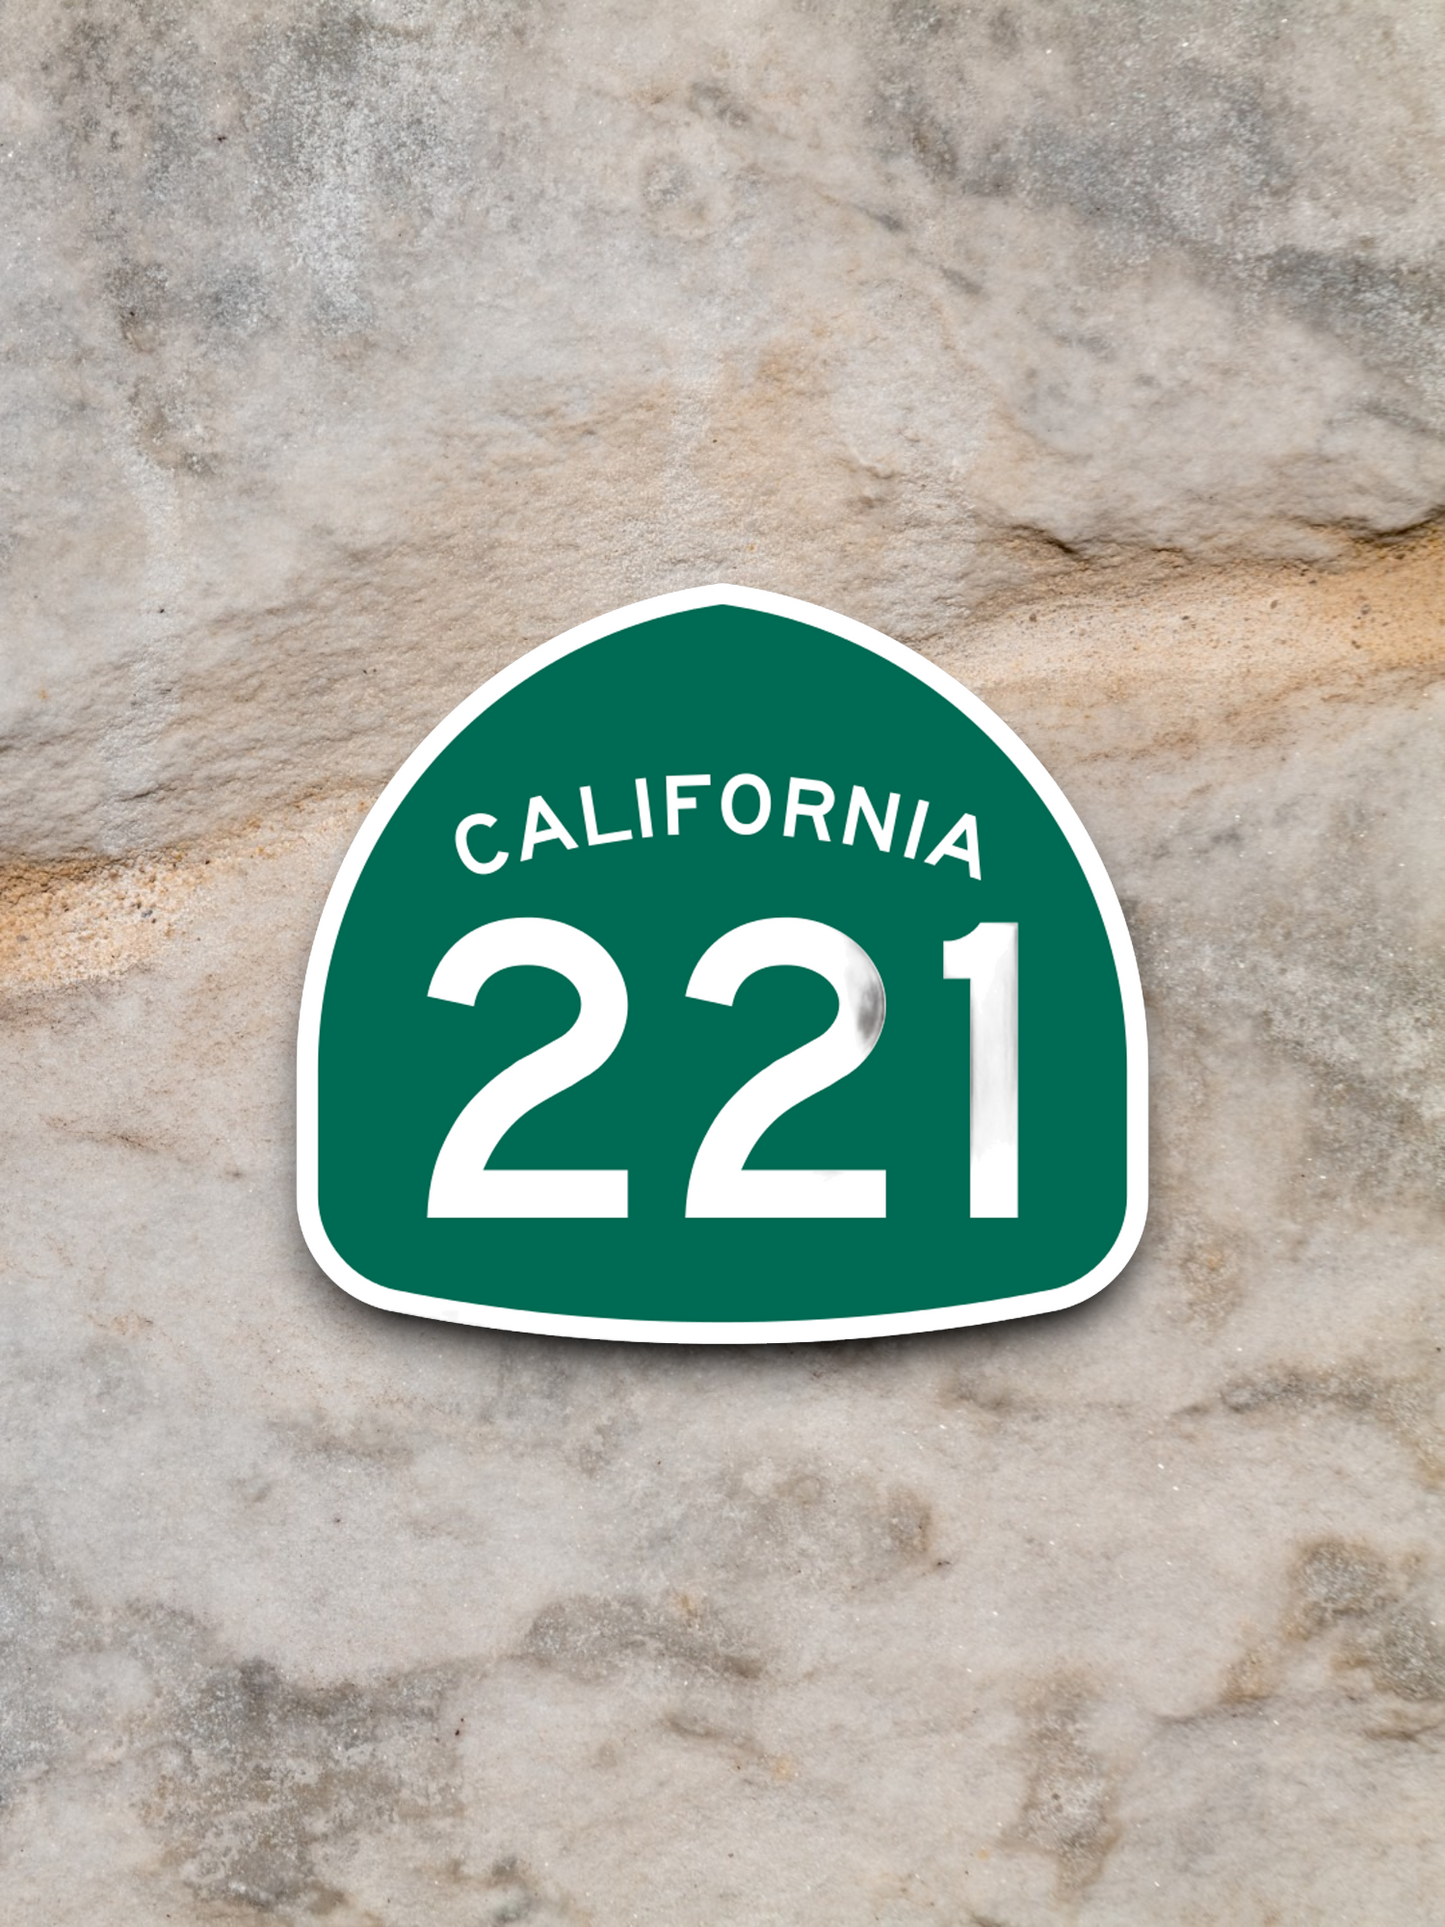 California State Route 221 Road Sign Sticker